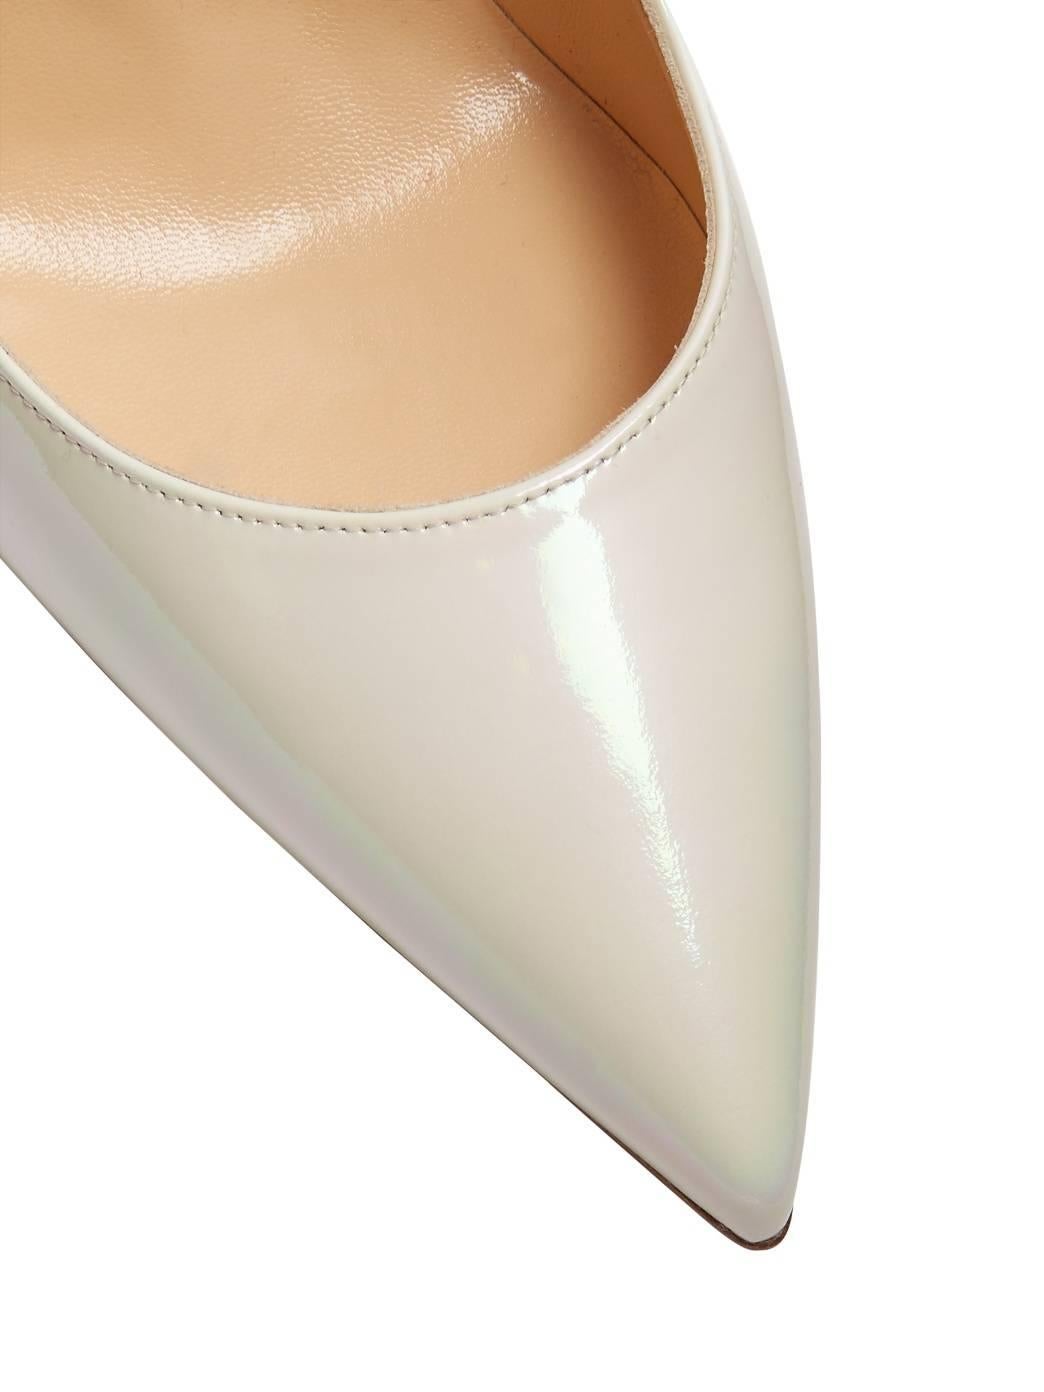 CURATOR'S NOTES

LAST PAIR! Christian Louboutin New Sold Out White Iridescent So Kate Heels Pumps in Box  

Size IT 41
Leather
Slip on 
Made in Italy
Heel height 5